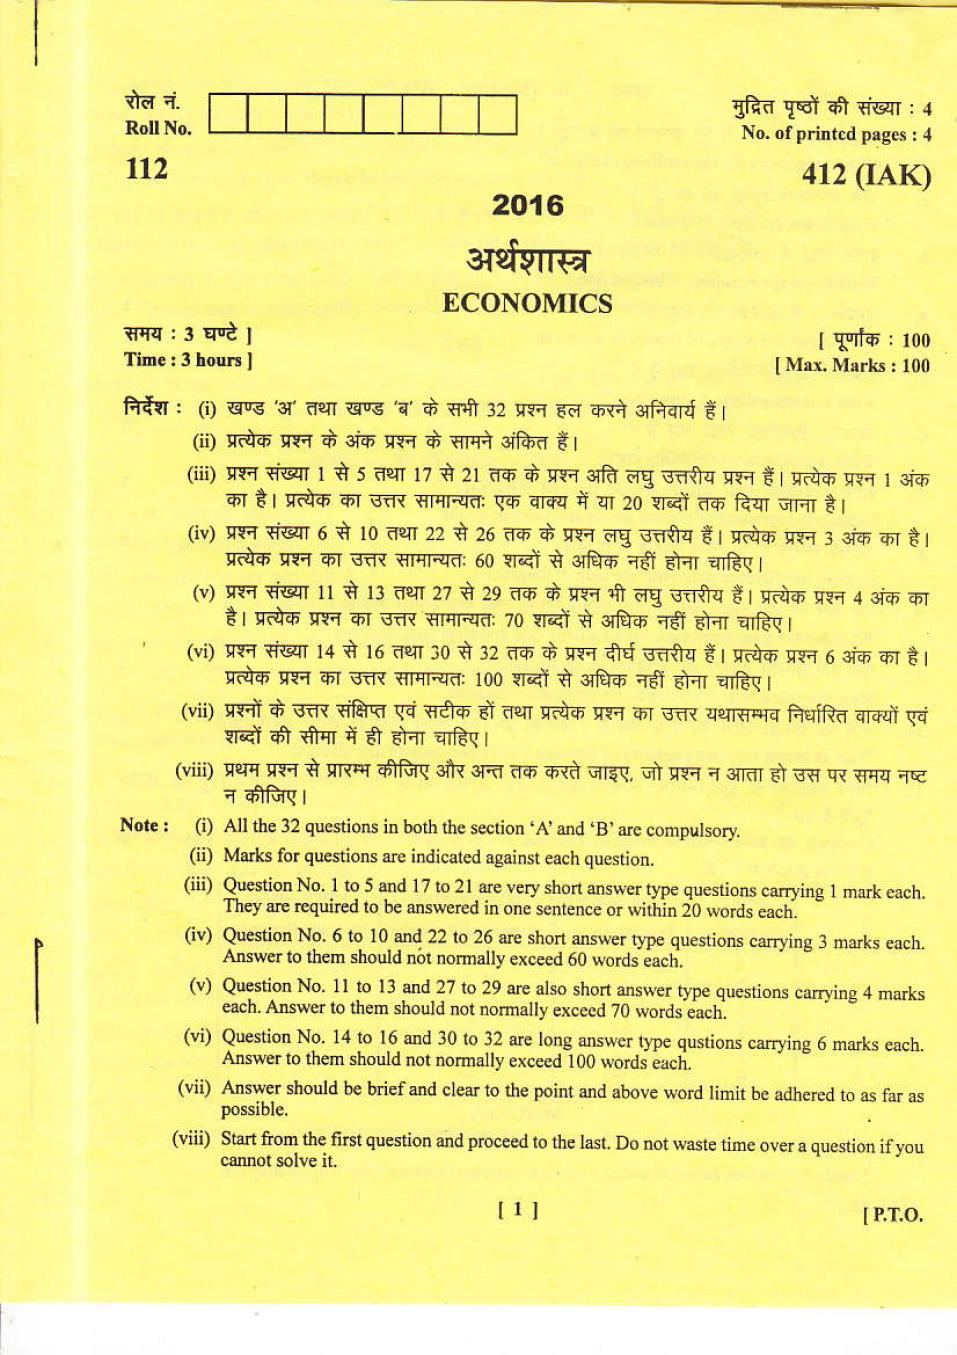 Uttarakhand Board Class 12 Question Paper 2016 for Economics - Page 1